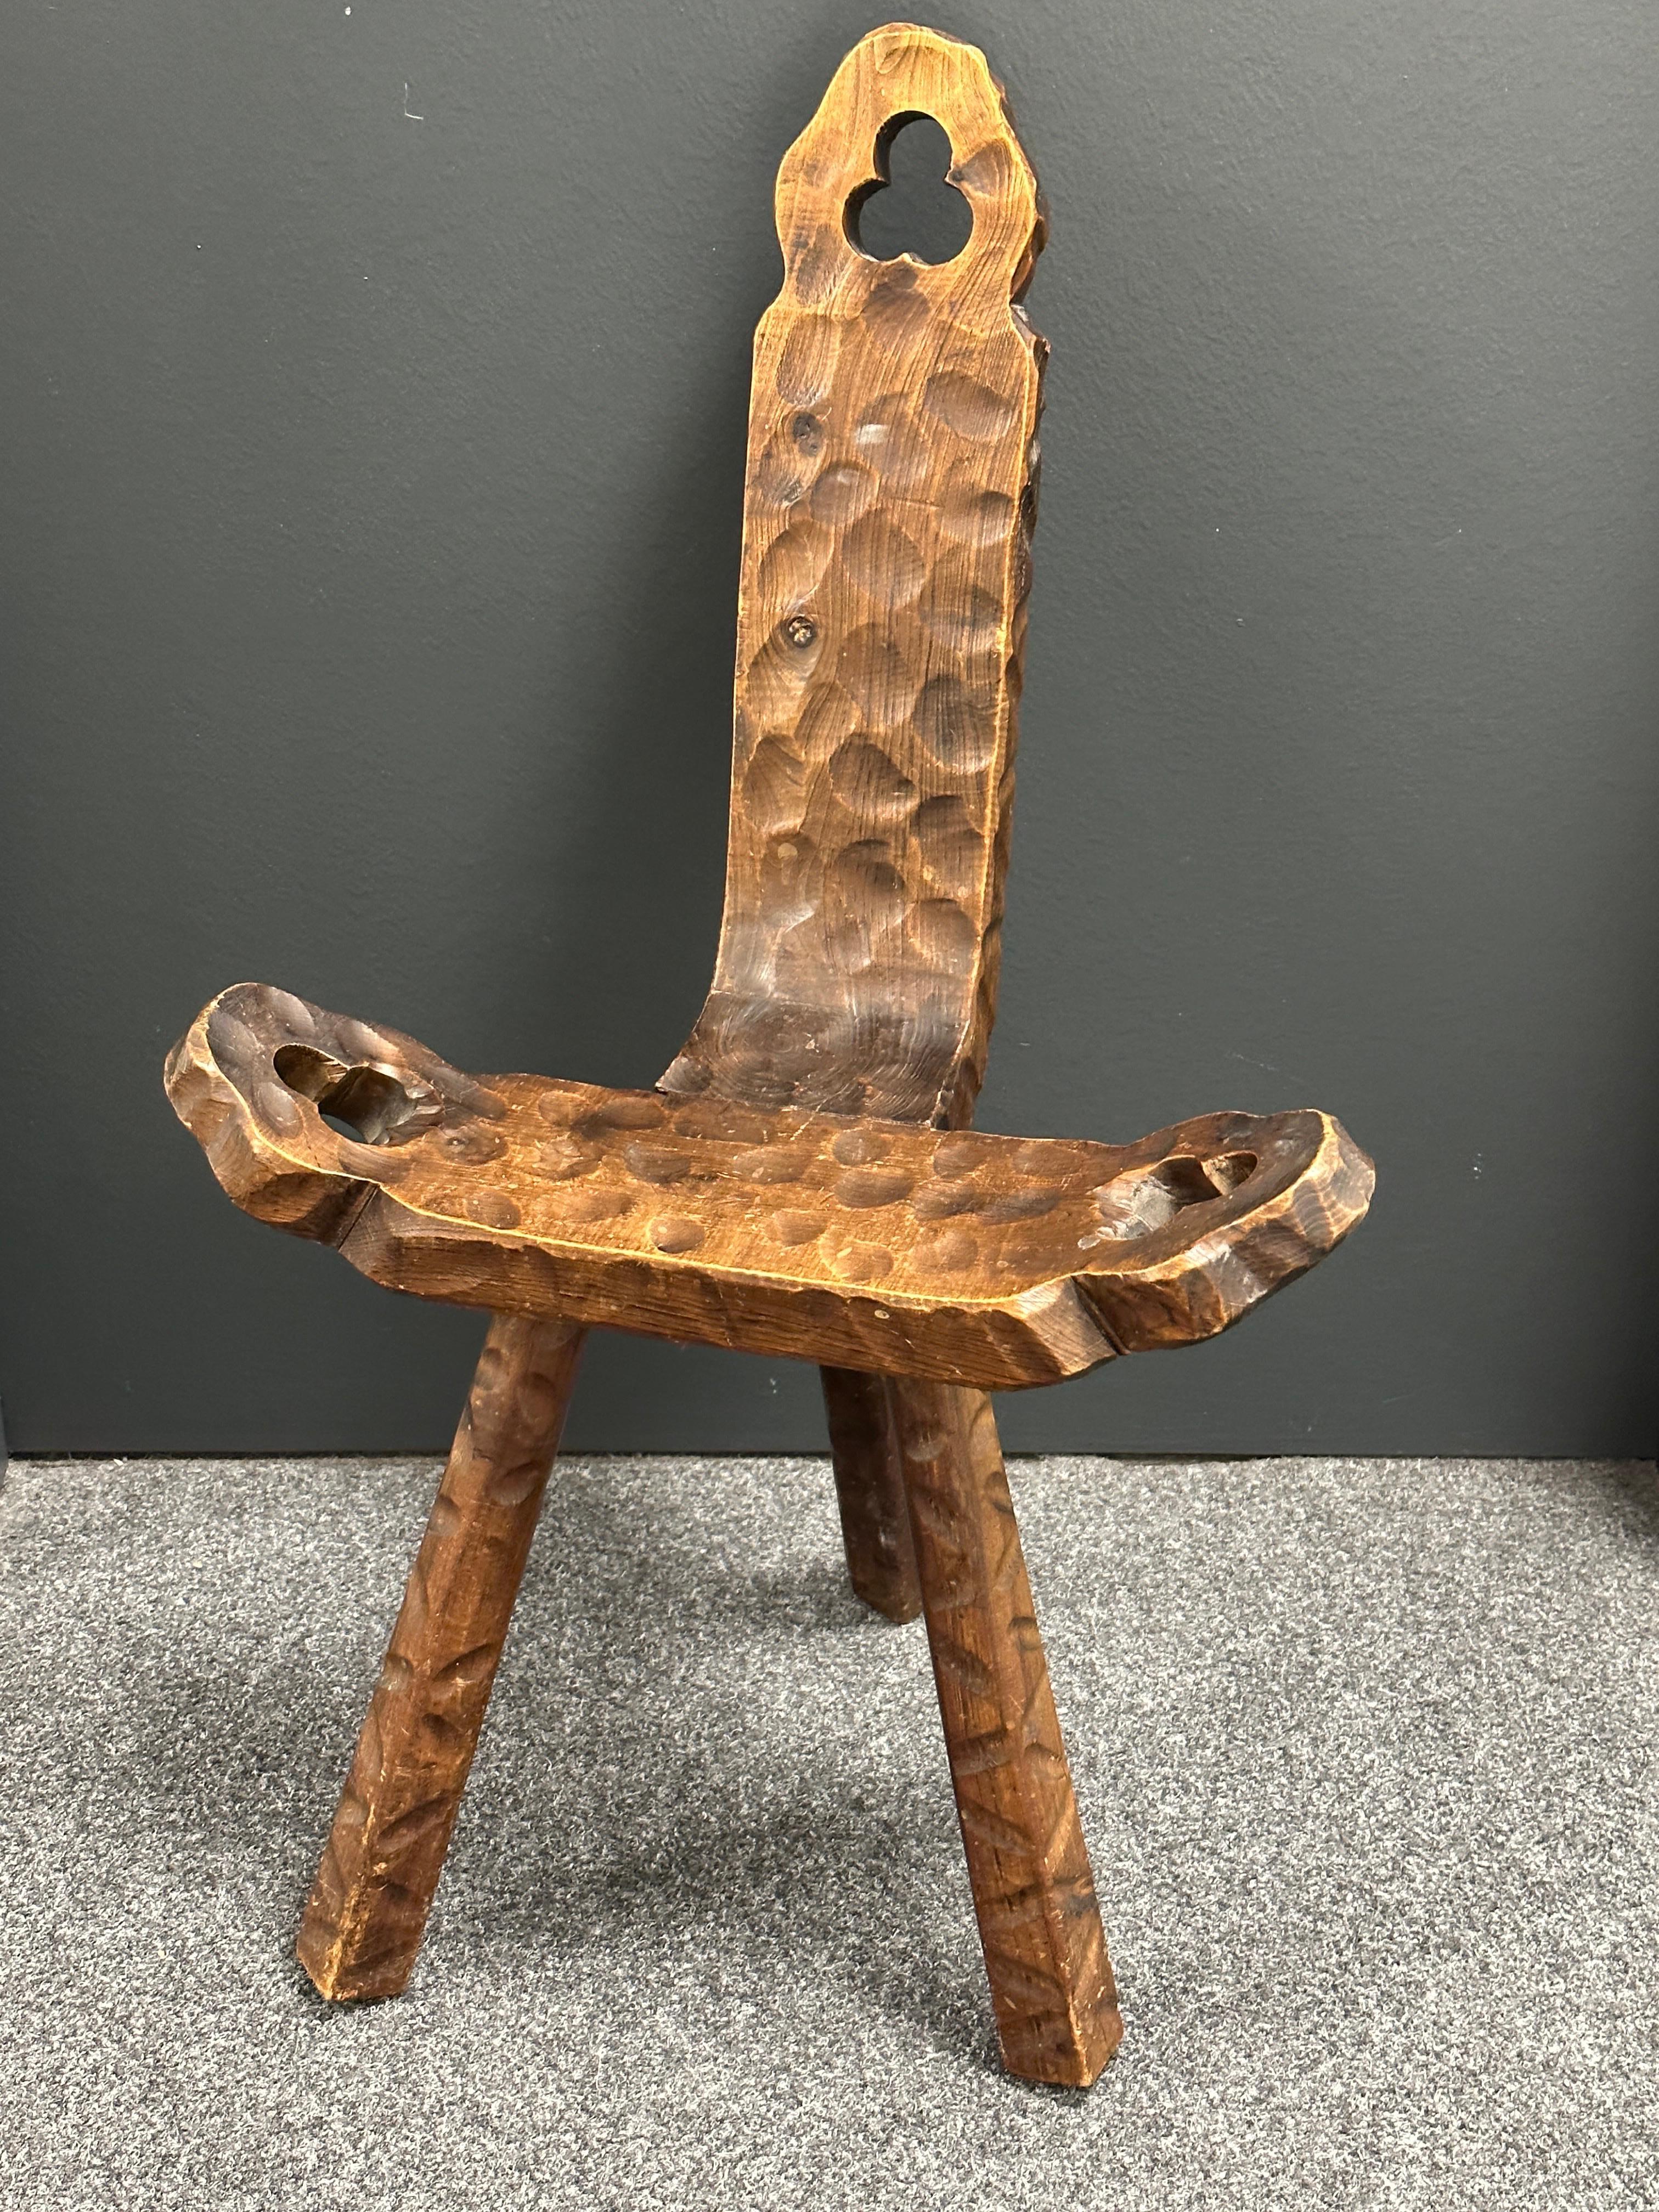 Late 20th Century Mid-Century Modern Brutalist Sculptural Wood Tripod Chair, Spain Vintage 1970s For Sale